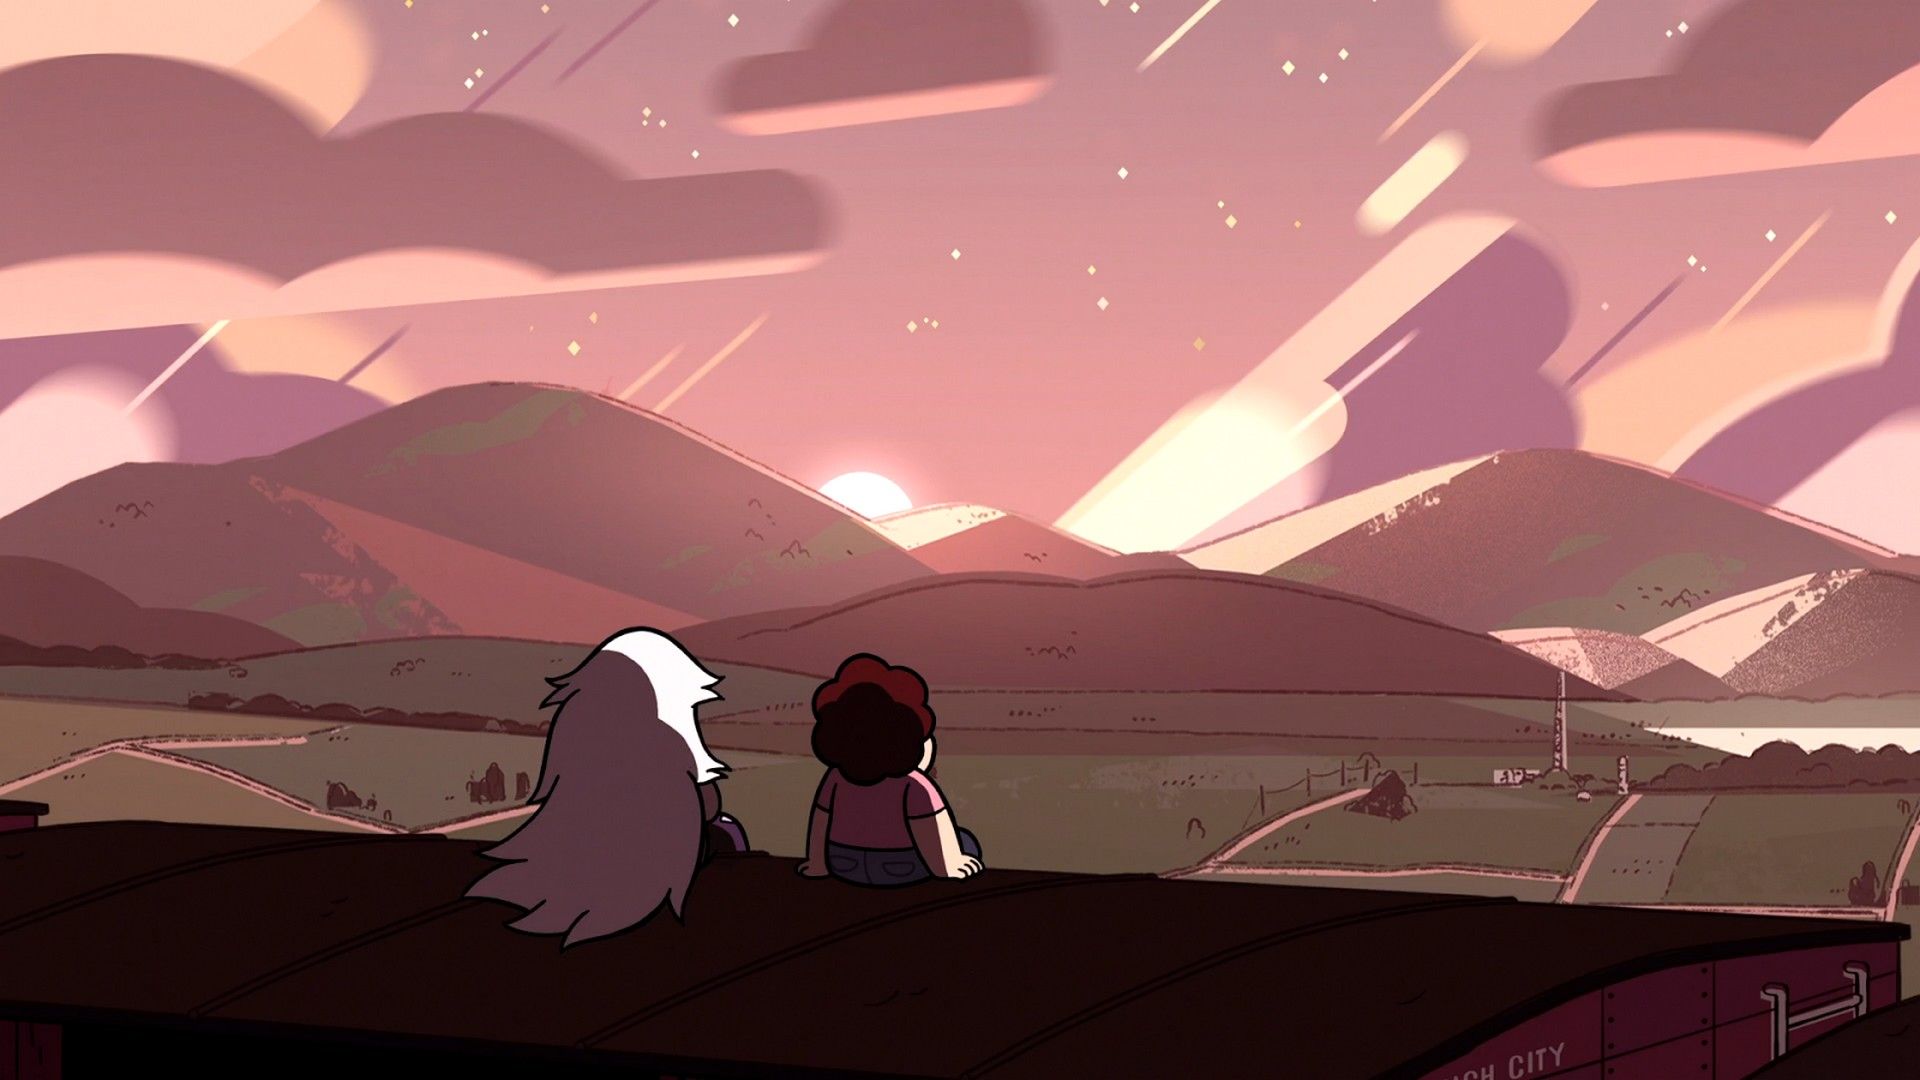 Steven Universe Landscape Of Universe HD Movies Wallpapers  HD Wallpapers   ID 39503